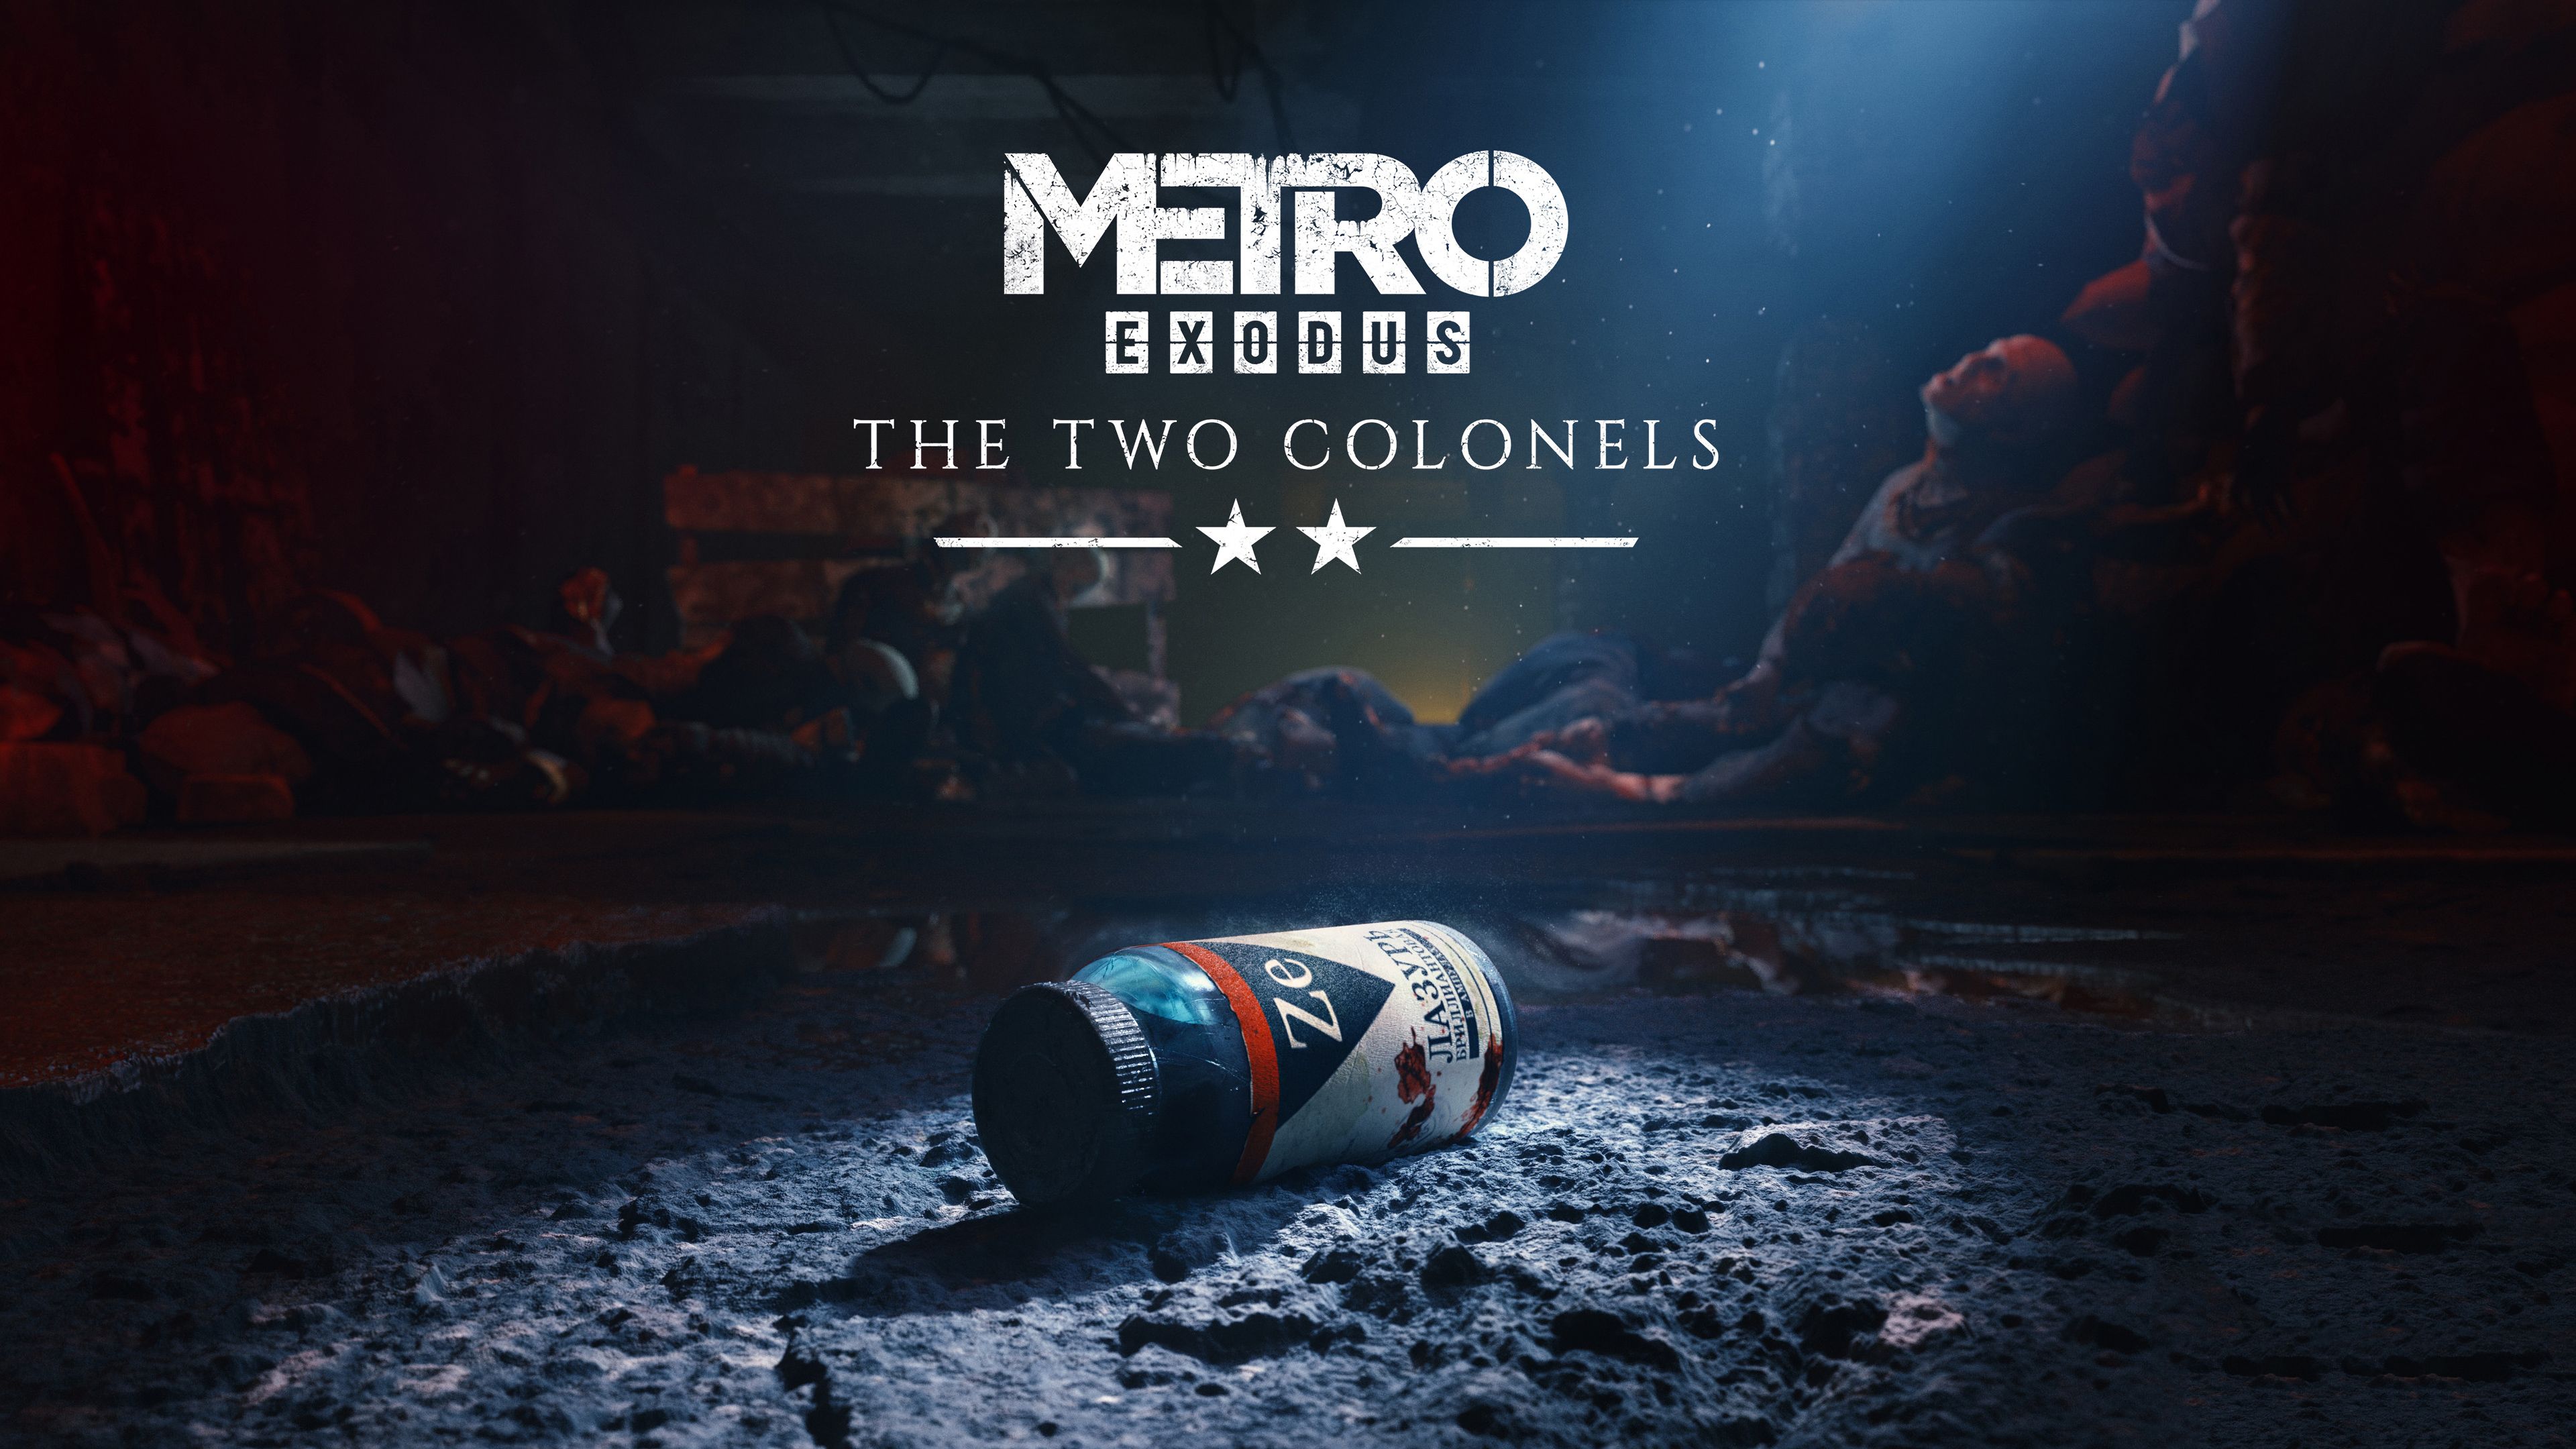 Metro Exodus The Two Colonels, HD Games, 4k Wallpaper, Image